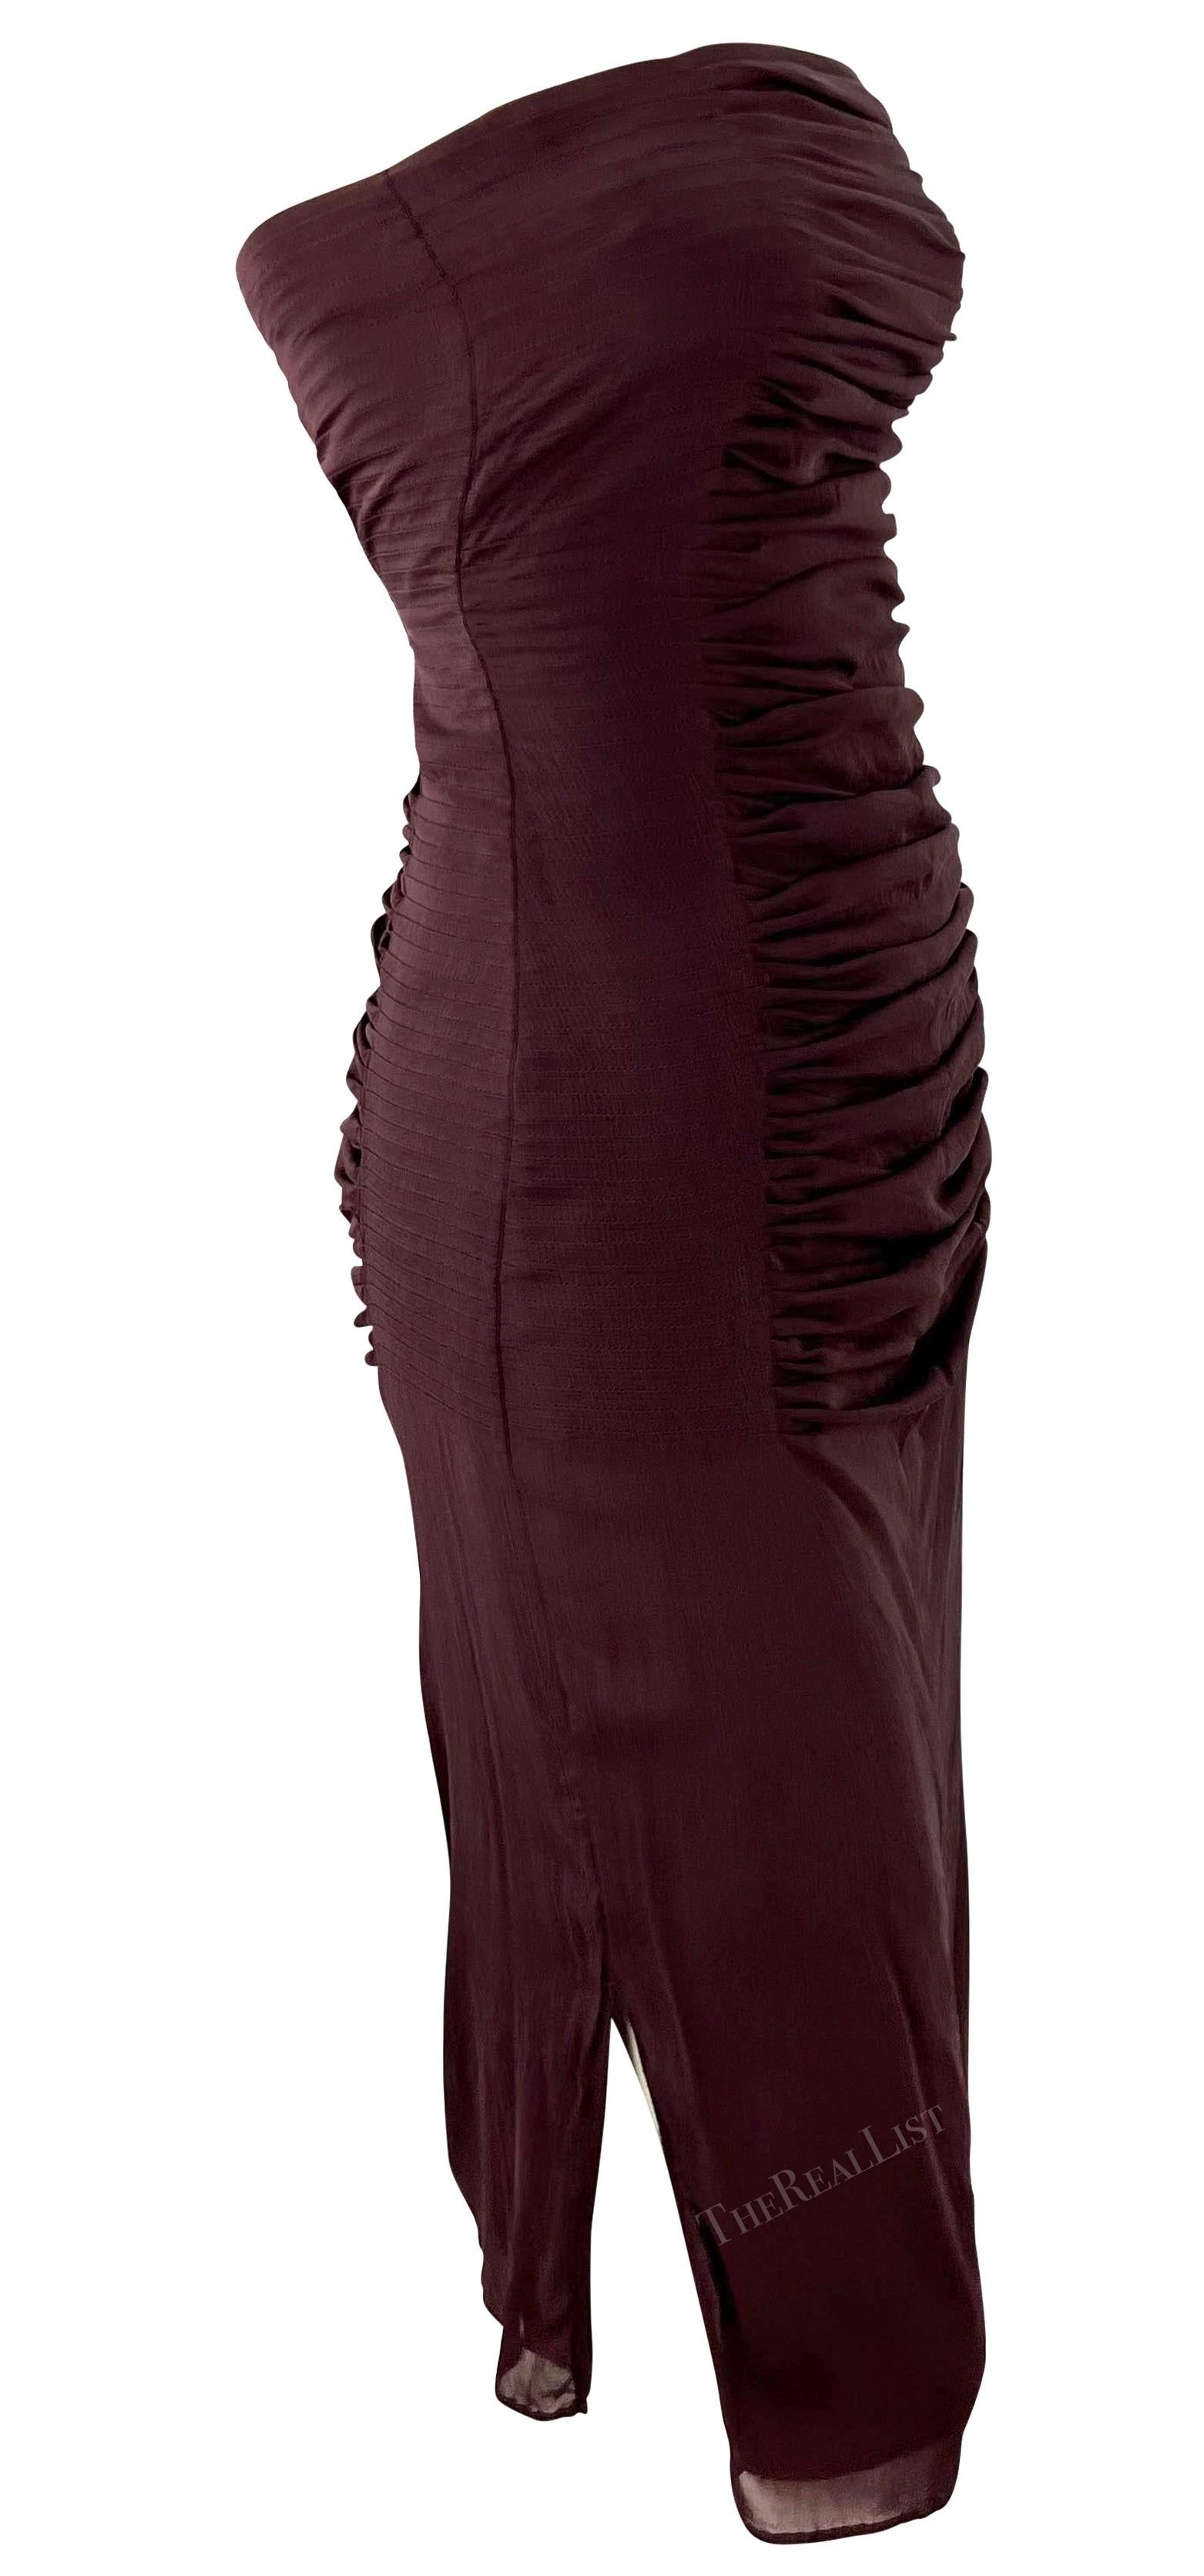 S/S 2001 Yves Saint Laurent by Tom Ford Sheer Maroon Pleat Strapless Mini Dress For Sale 2